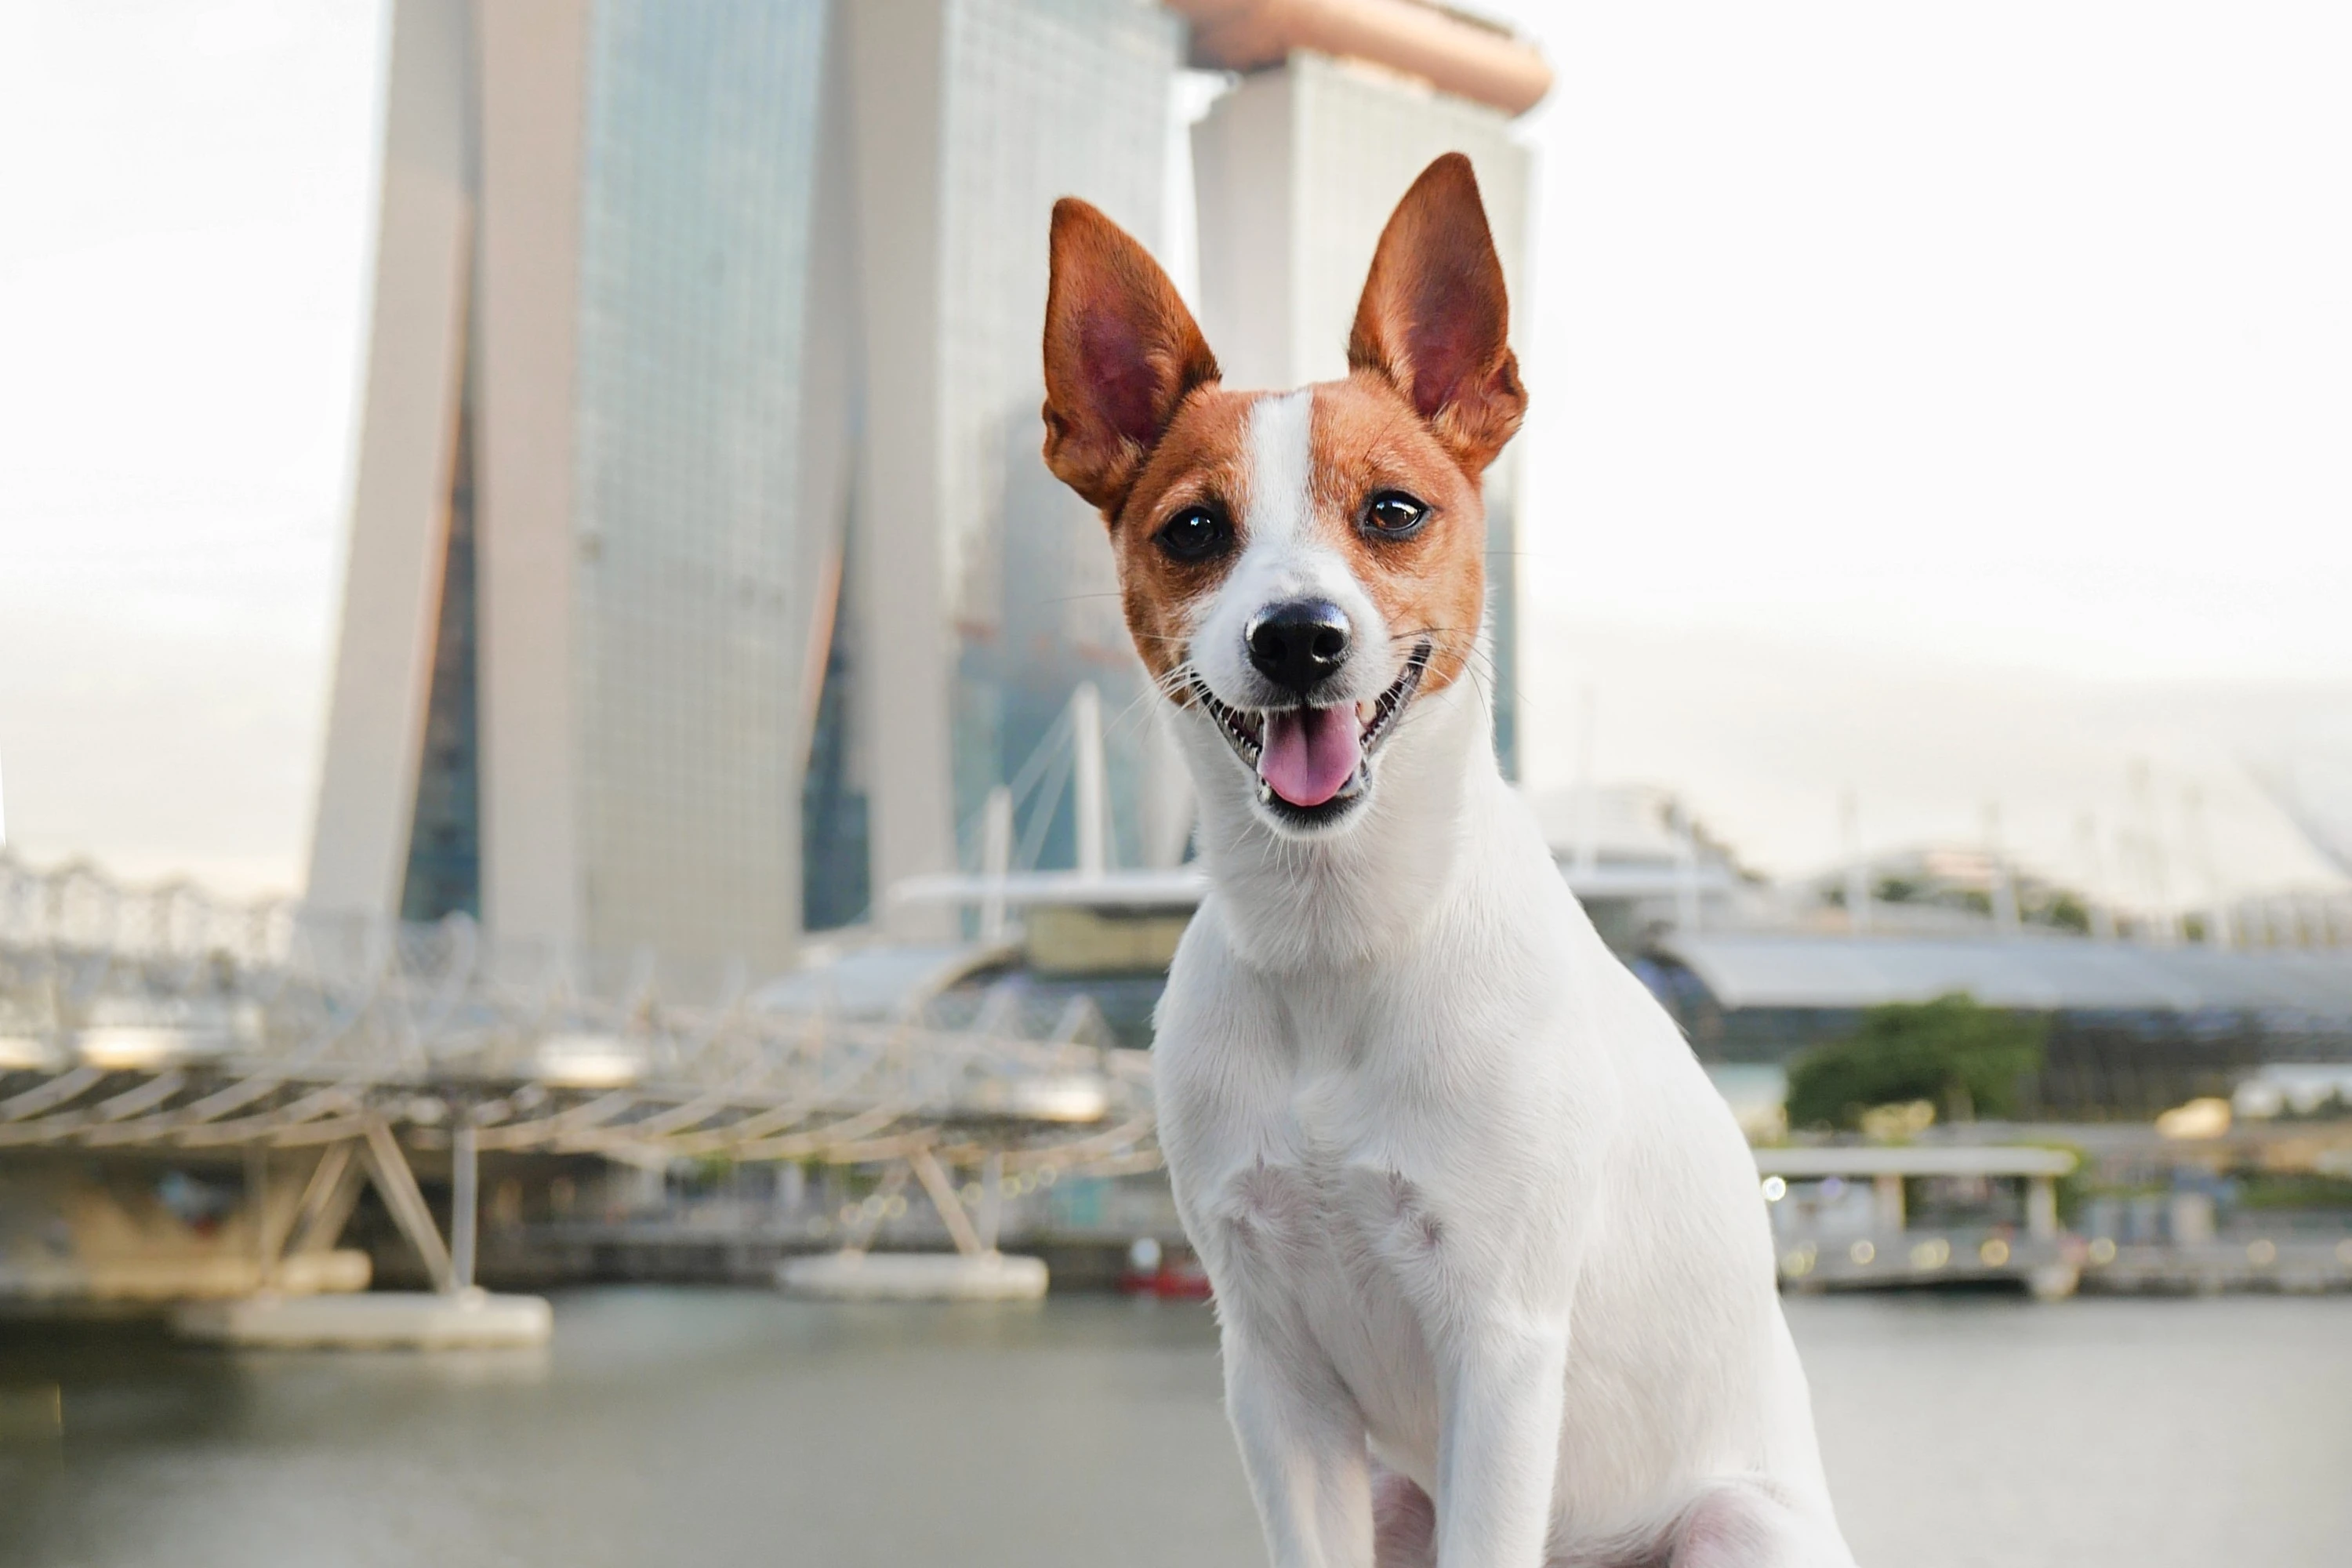 Where you can adopt a cat or dog in Singapore